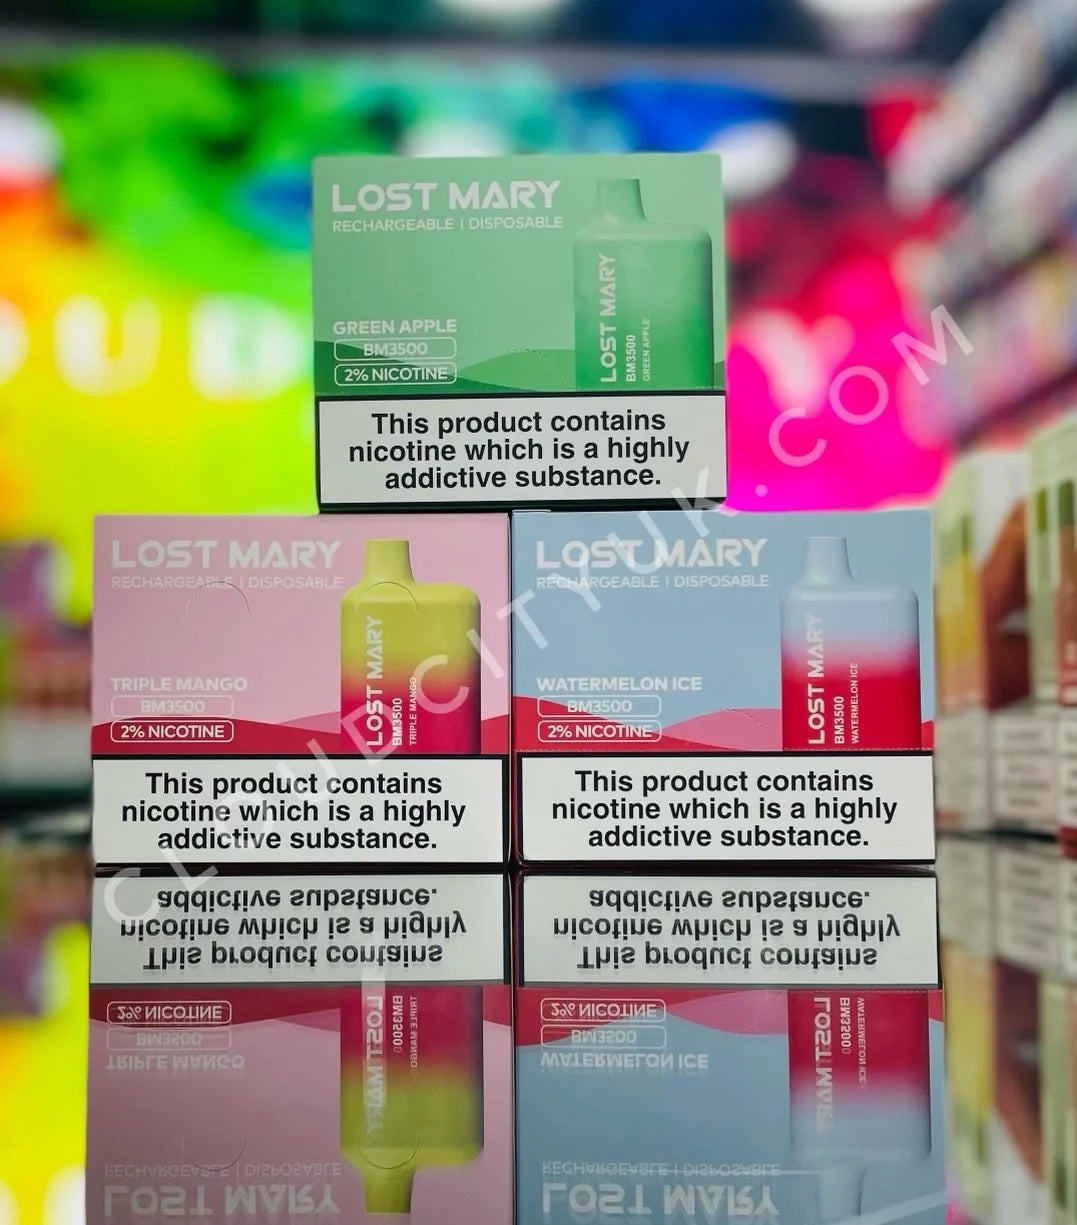 Lost Mary 3500 Rechargeable Disposable Vape | Cloud City UK.